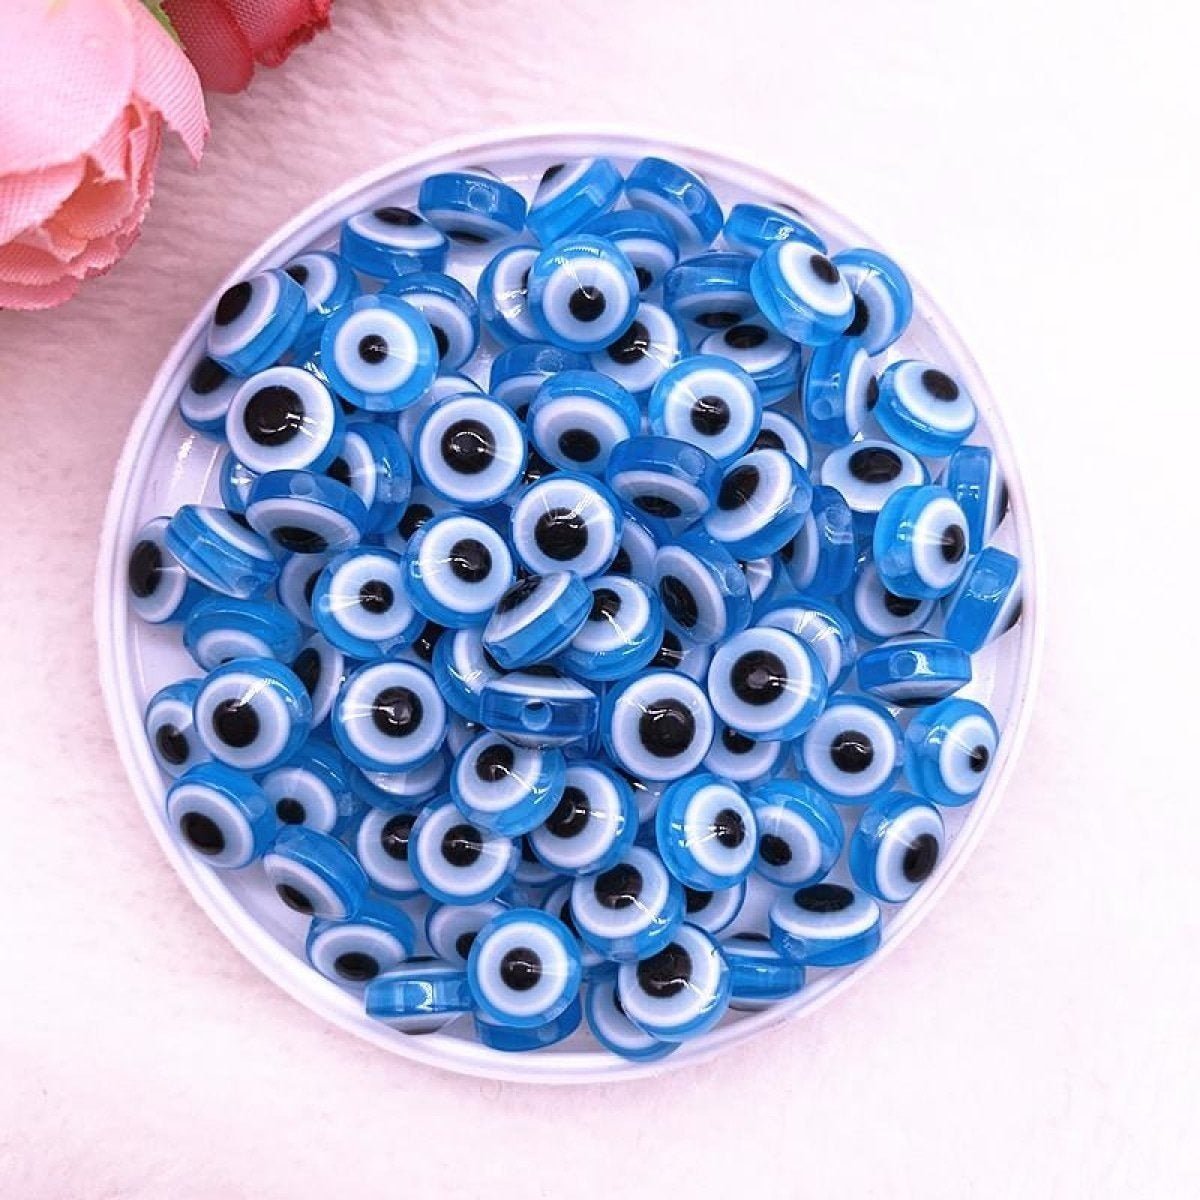 48pcs 8/10mm Resin Spacer Beads Double Sided Eyes for Jewellery Making DIY Bracelet Beads Flat Backed - Light Blue 8mm - - Asia Sell